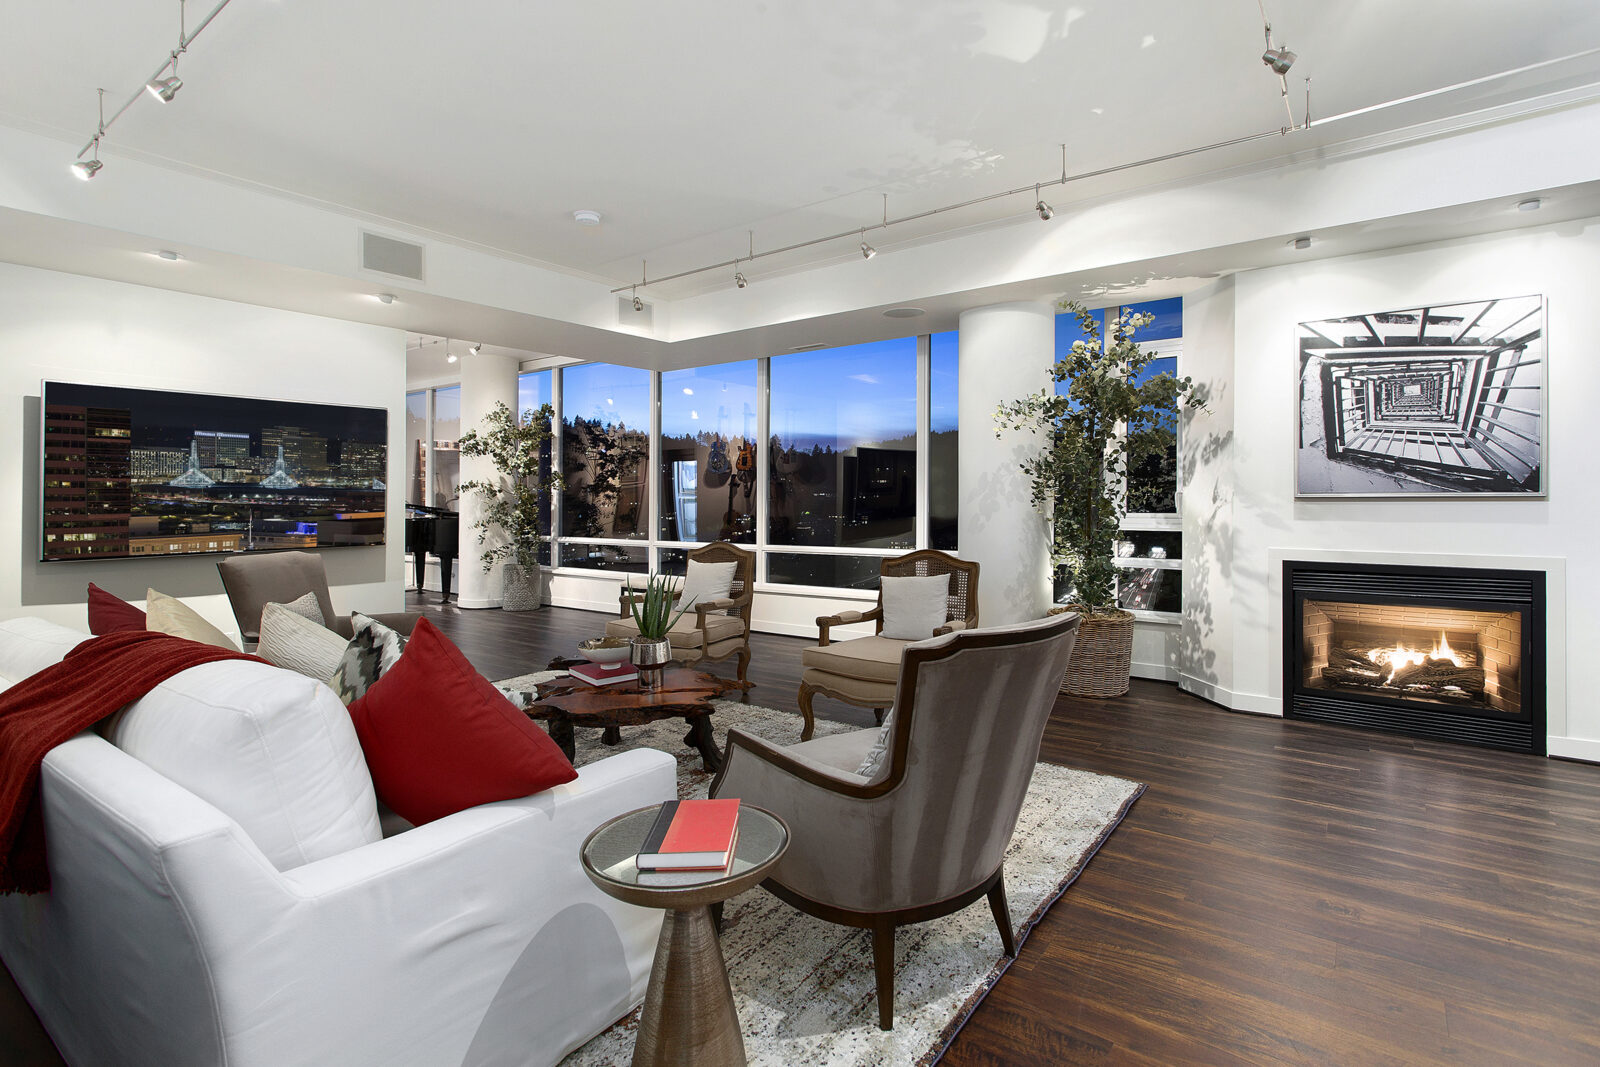 Living space in Portland penthouse with fireplace and views of city.